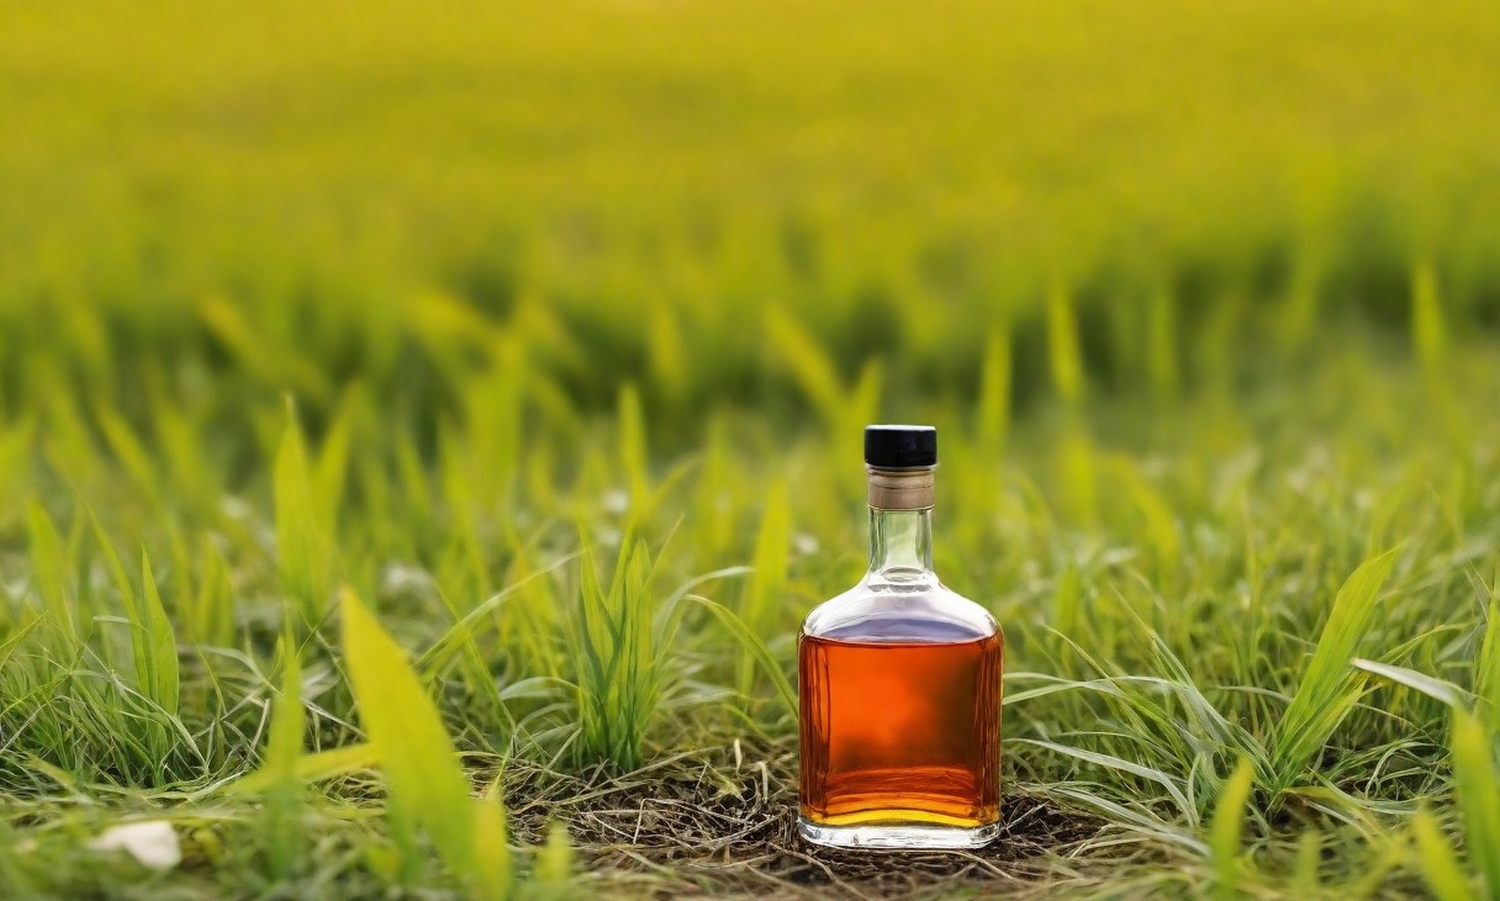 pikaso_texttoimage_a-bottle-of-whisky-in-the-middle-of-a-grass-field-4.jpg